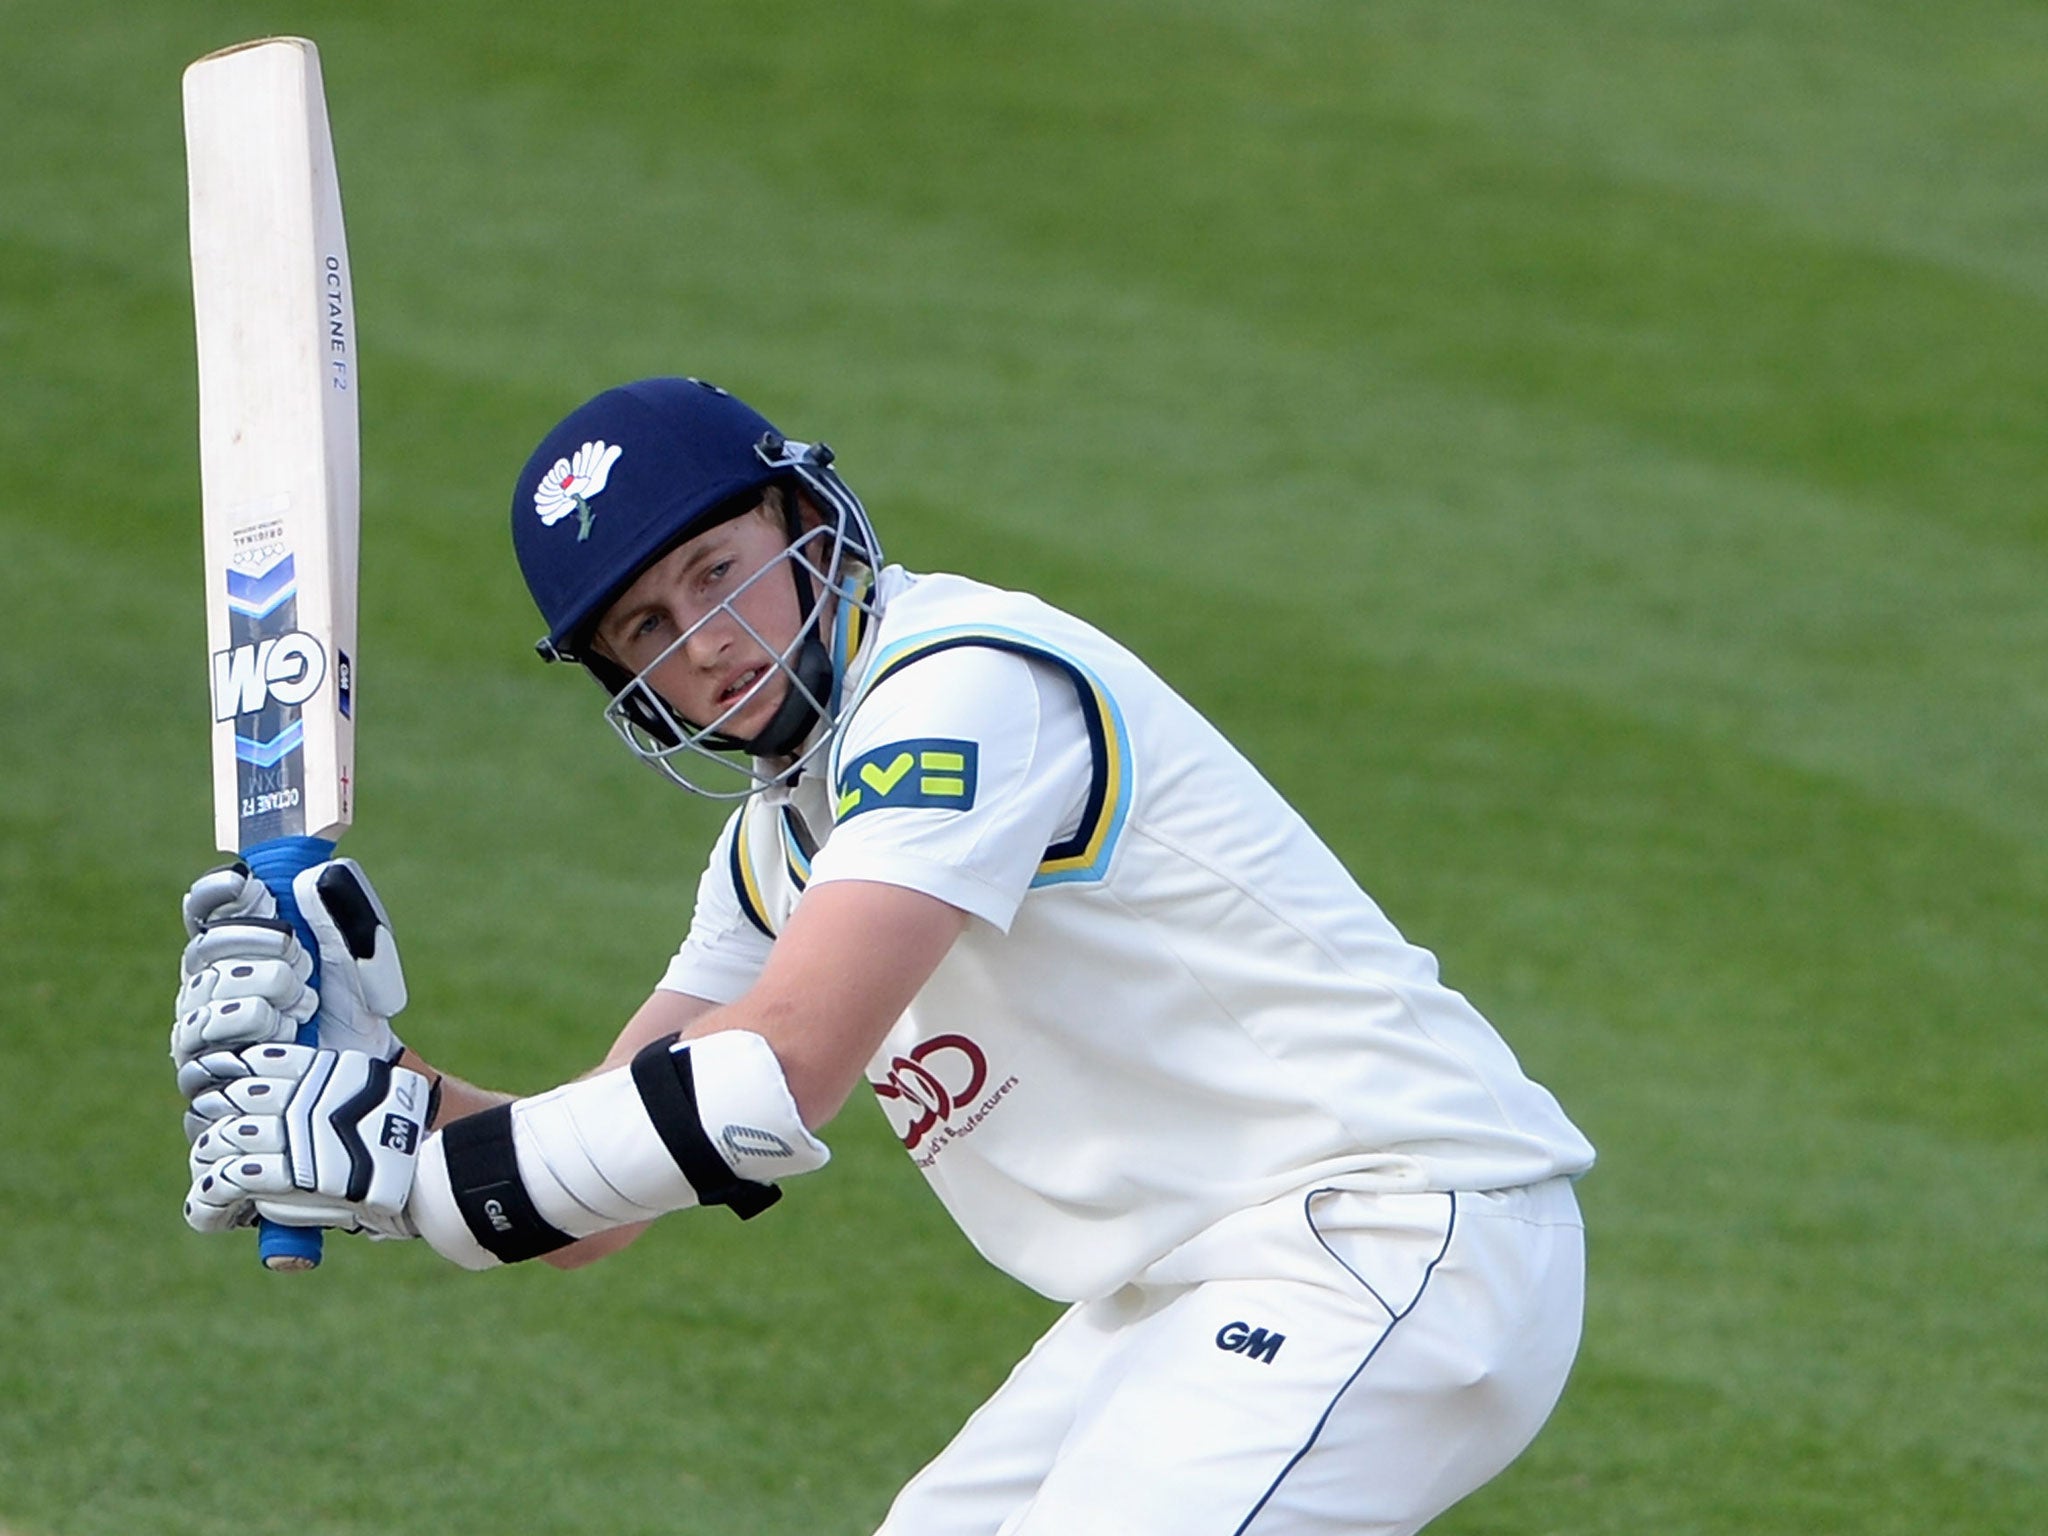 Joe Root showed his class with 182 to help Yorkshire to victory